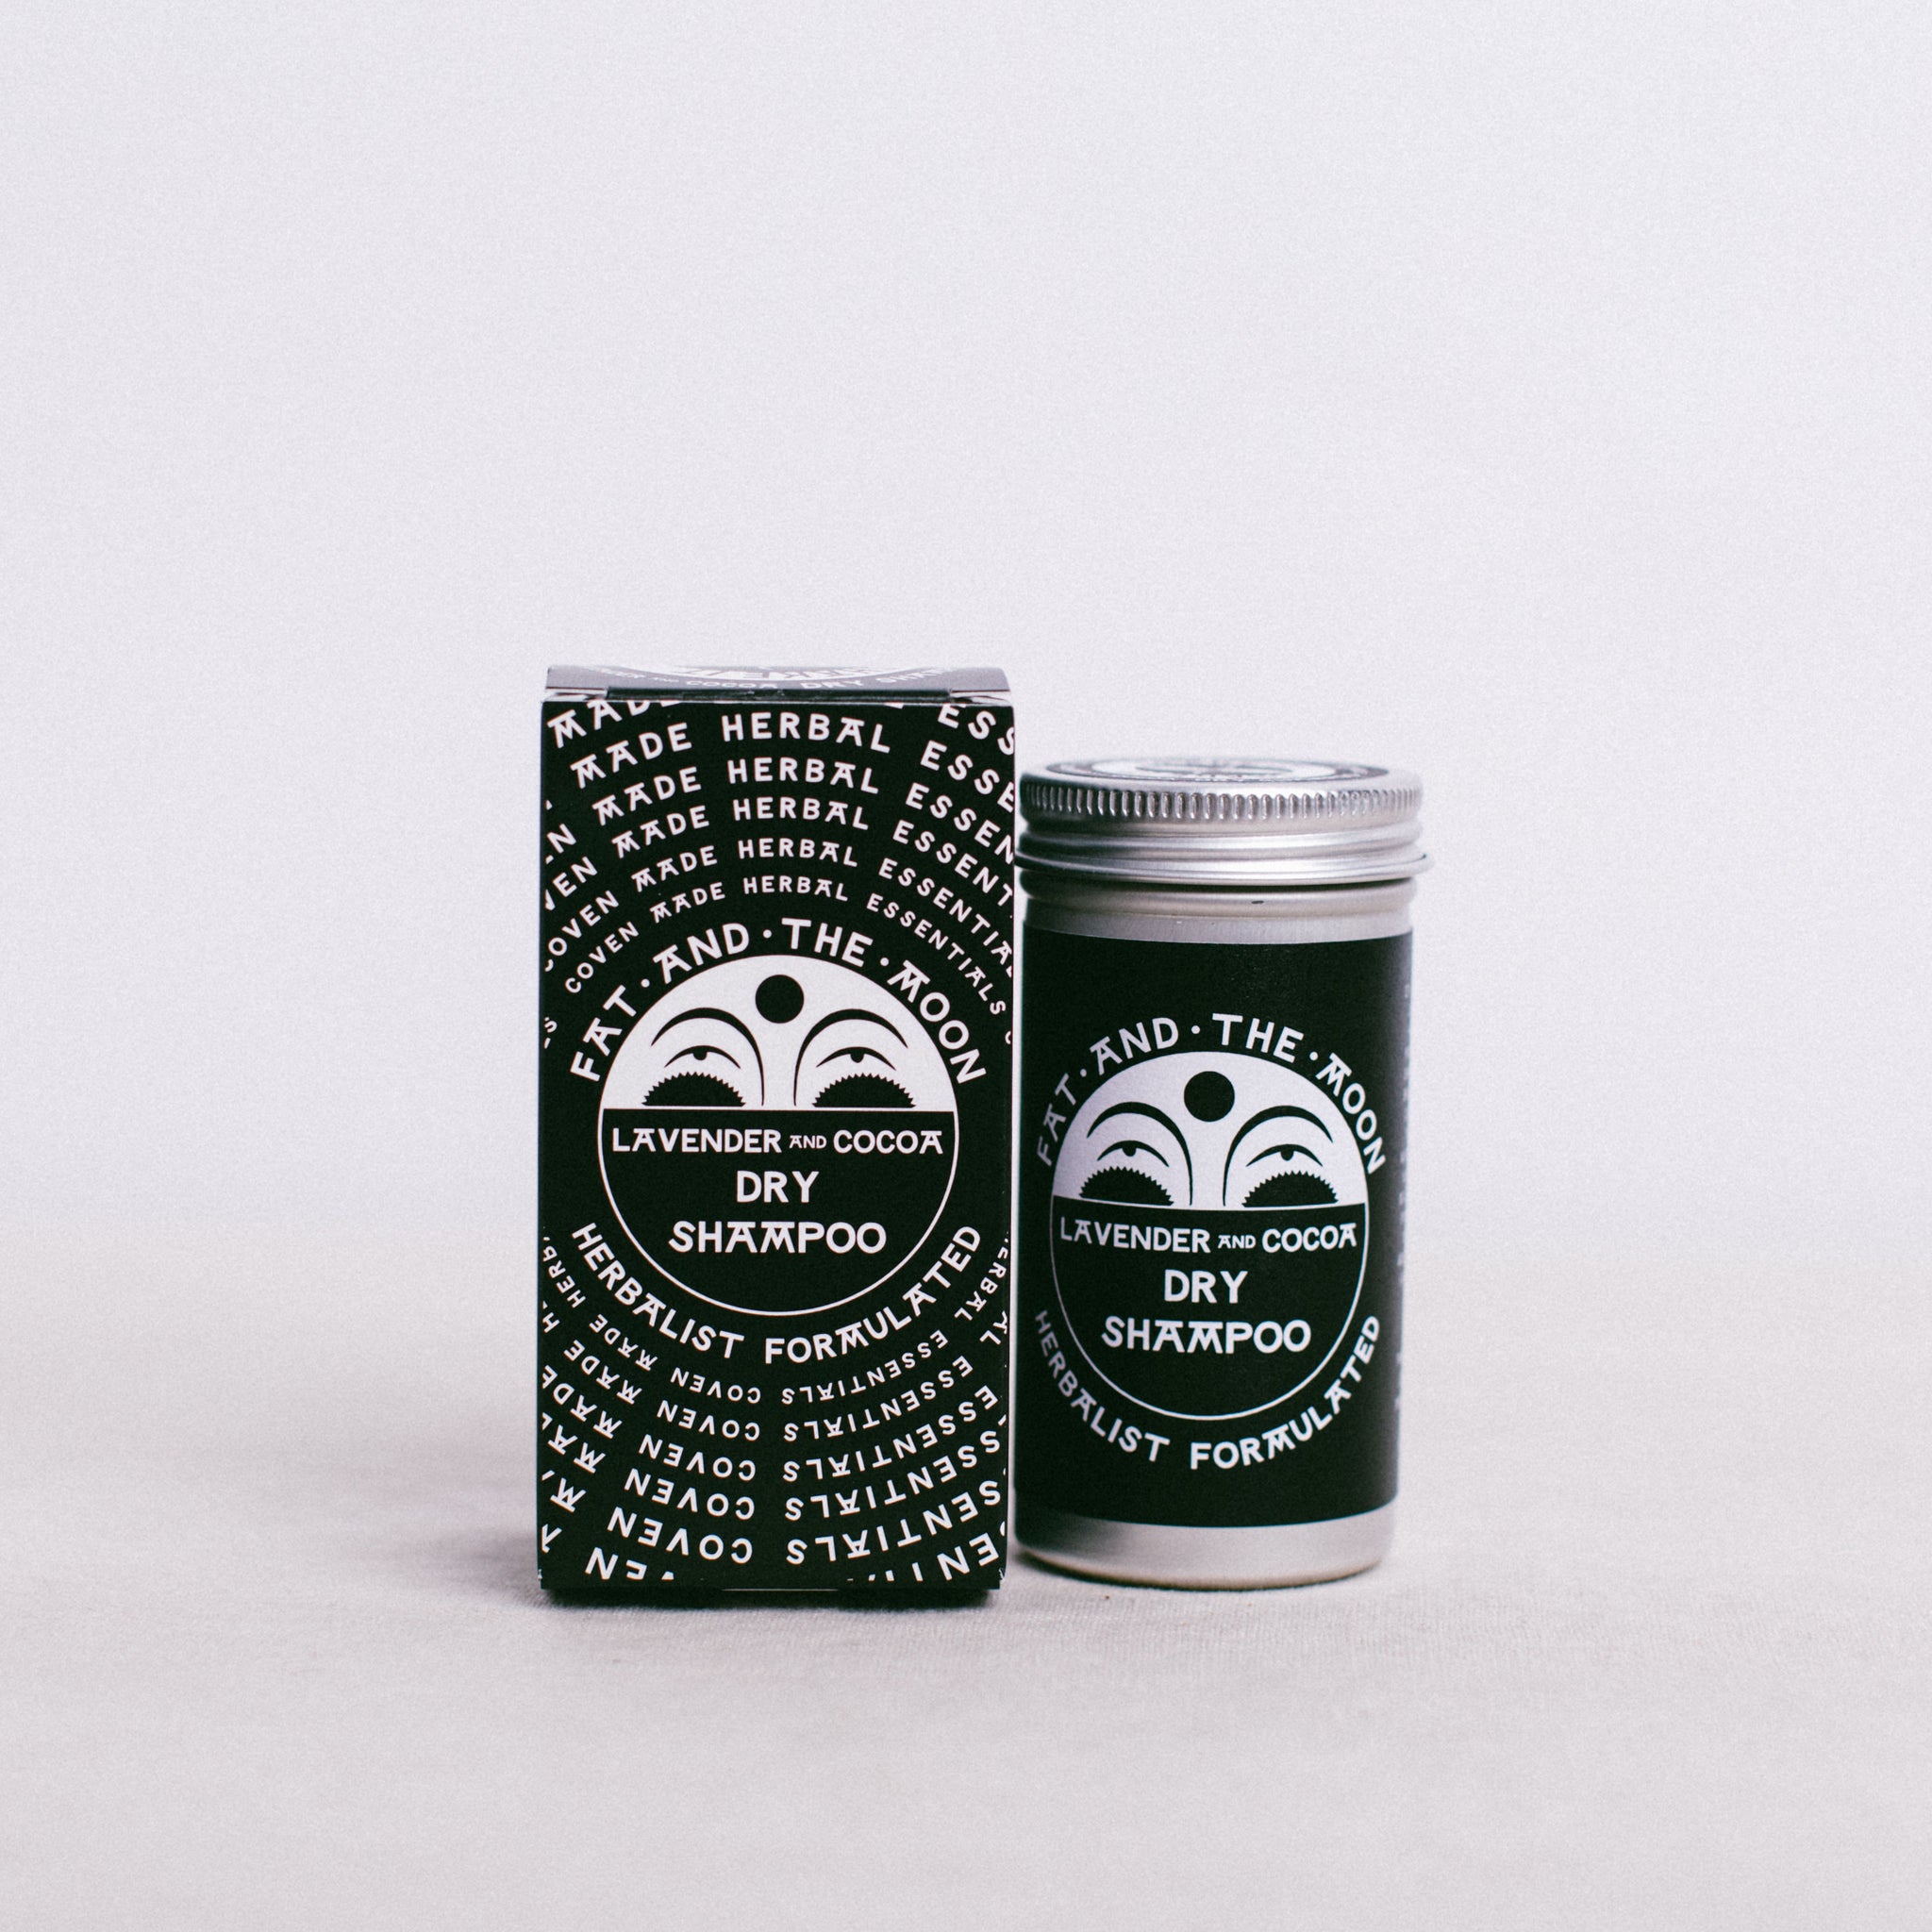 LAVENDER & COCOA DRY SHAMPOO || FAT AND THE MOON